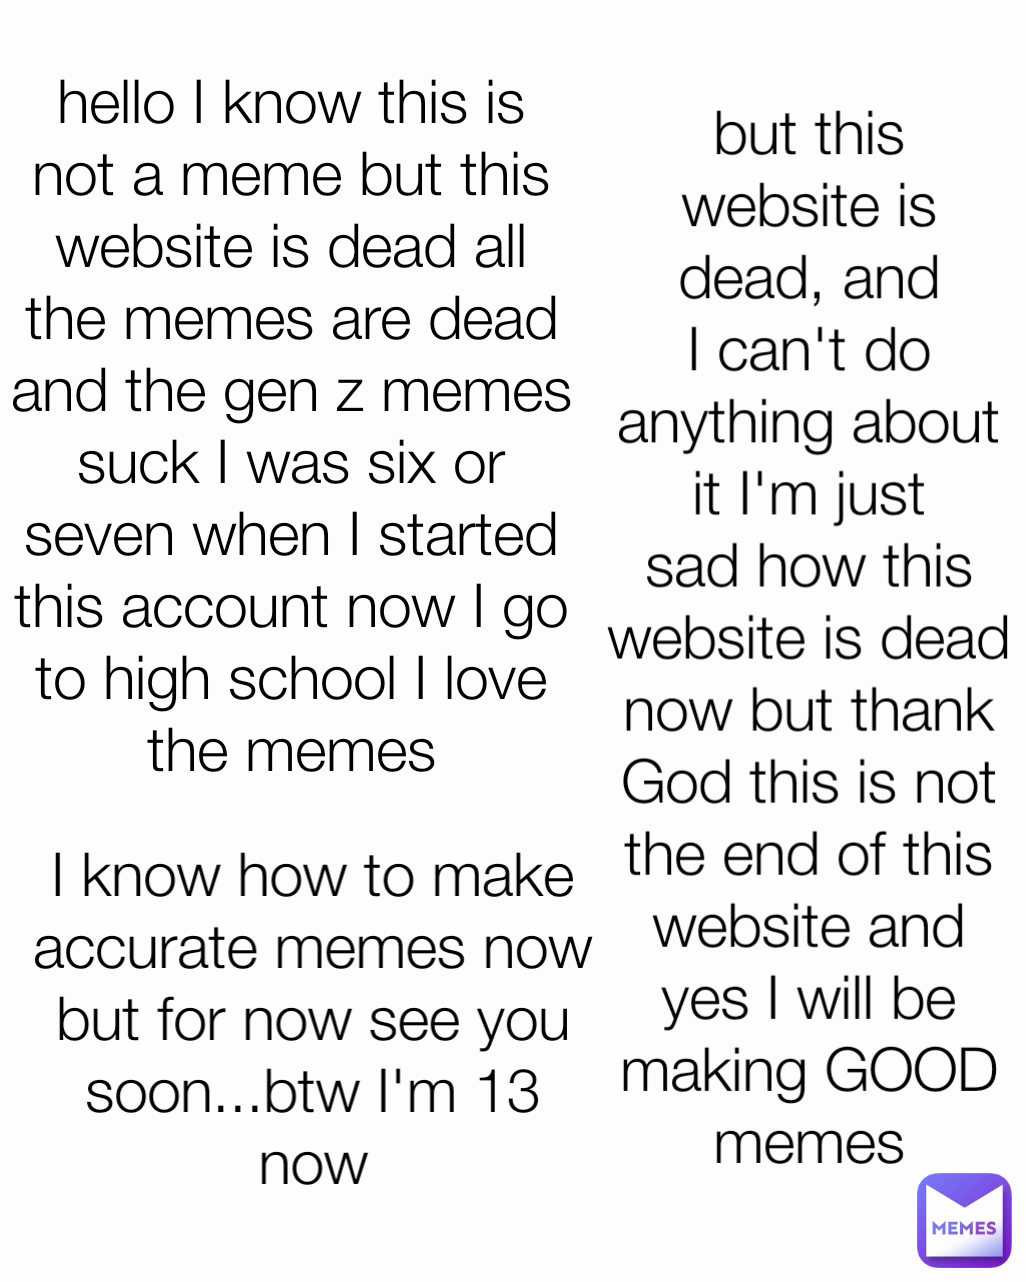 but this website is dead, and I can't do anything about it I'm just sad how this website is dead now but thank God this is not the end of this website and yes I will be making GOOD memes I know how to make accurate memes now but for now see you soon...btw I'm 13 now hello I know this is not a meme but this website is dead all the memes are dead and the gen z memes suck I was six or seven when I started this account now I go to high school I love the memes